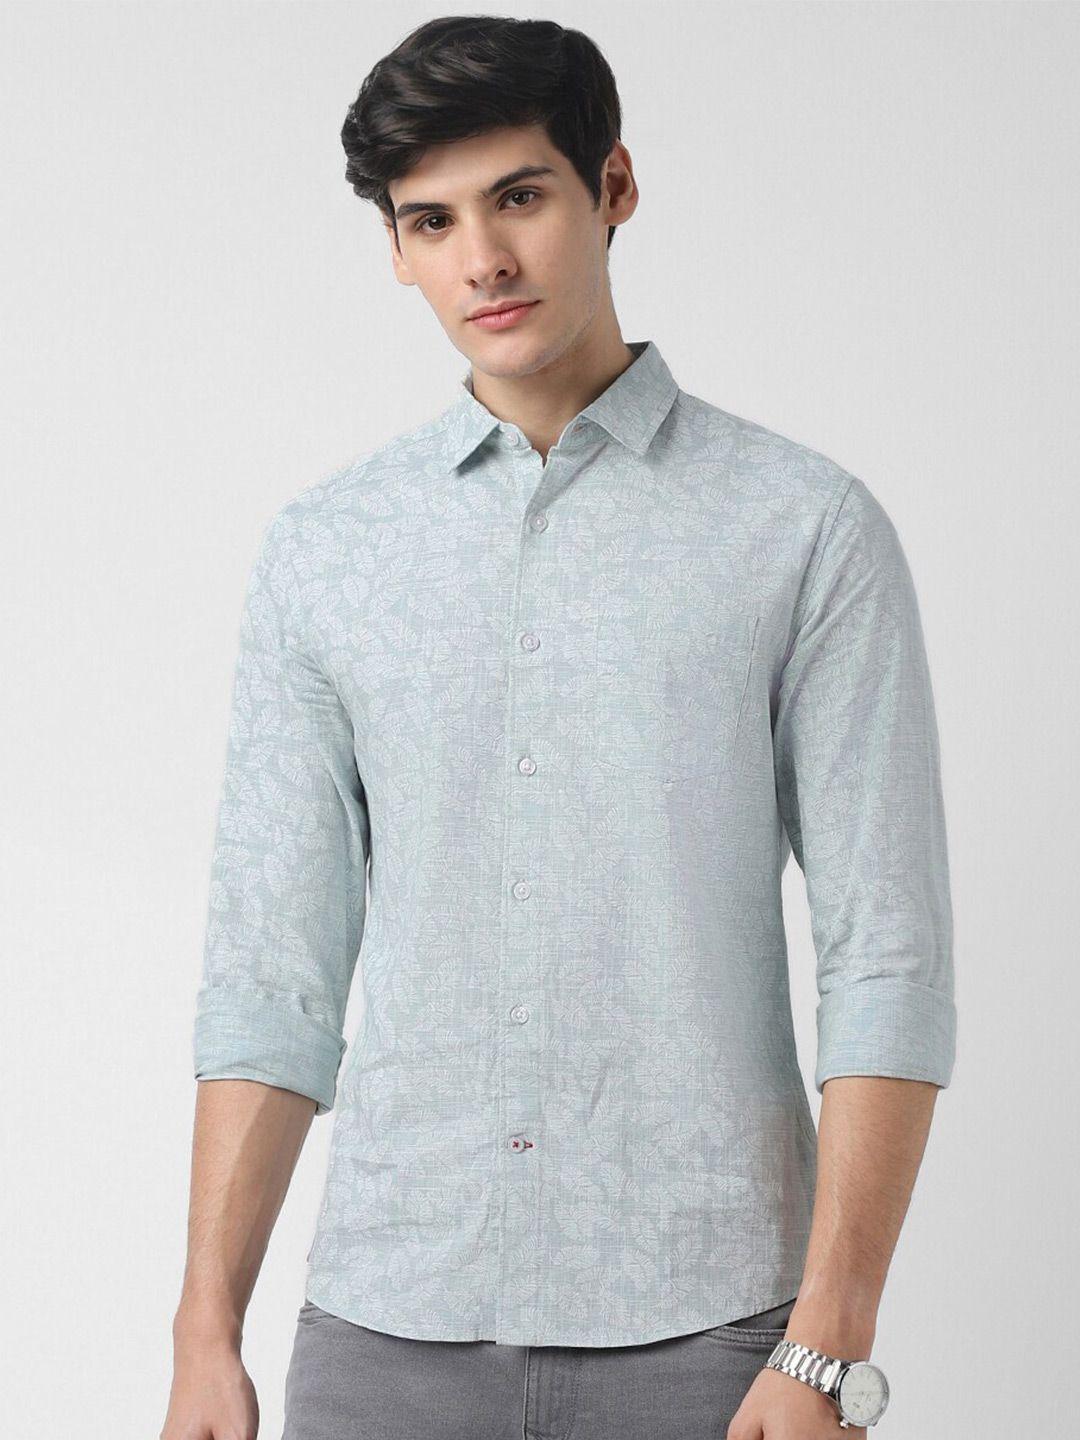 vastrad floral printed pure cotton casual shirt